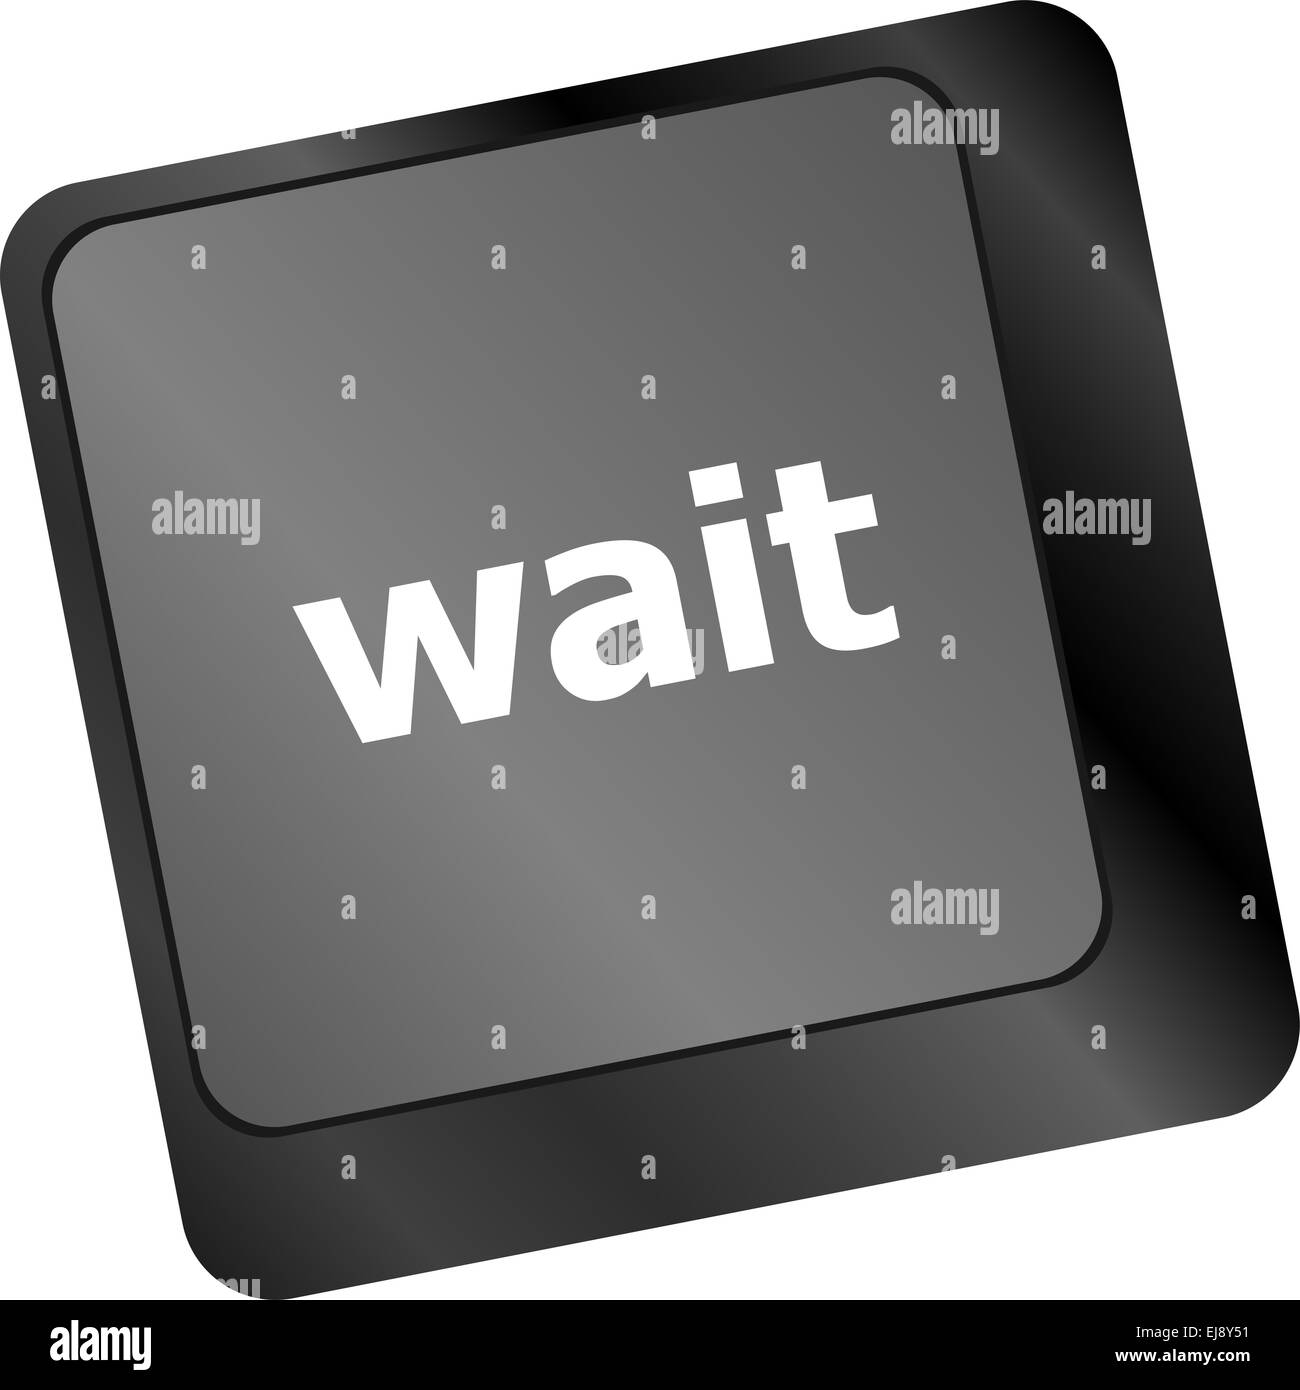 wait word button on a computer keyboard Stock Photo